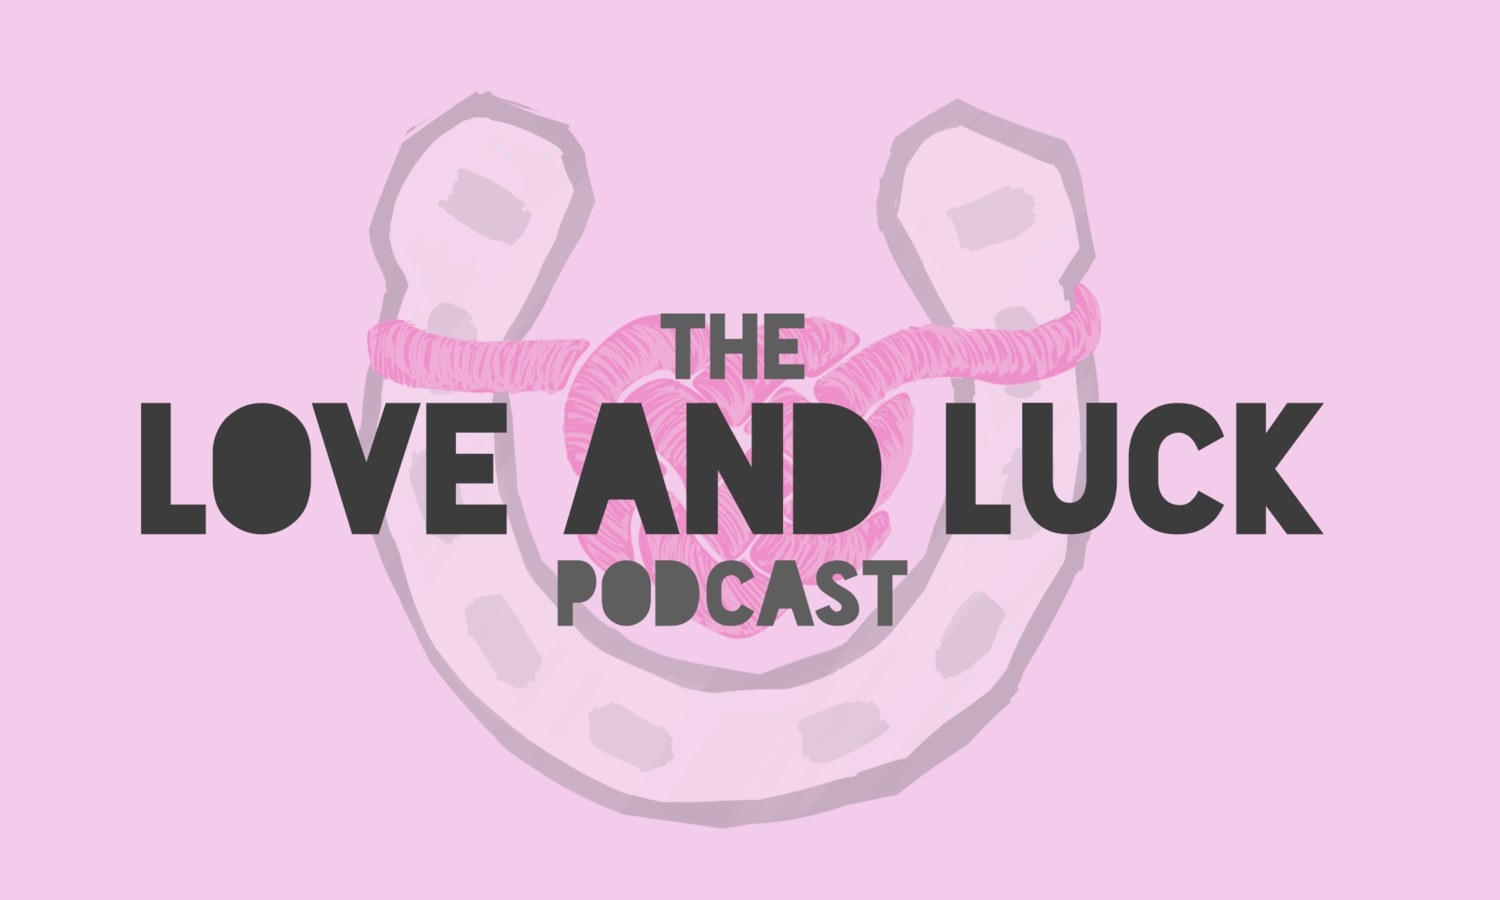 A pink logo with the podcast title and a knit heart tied around a wishbone